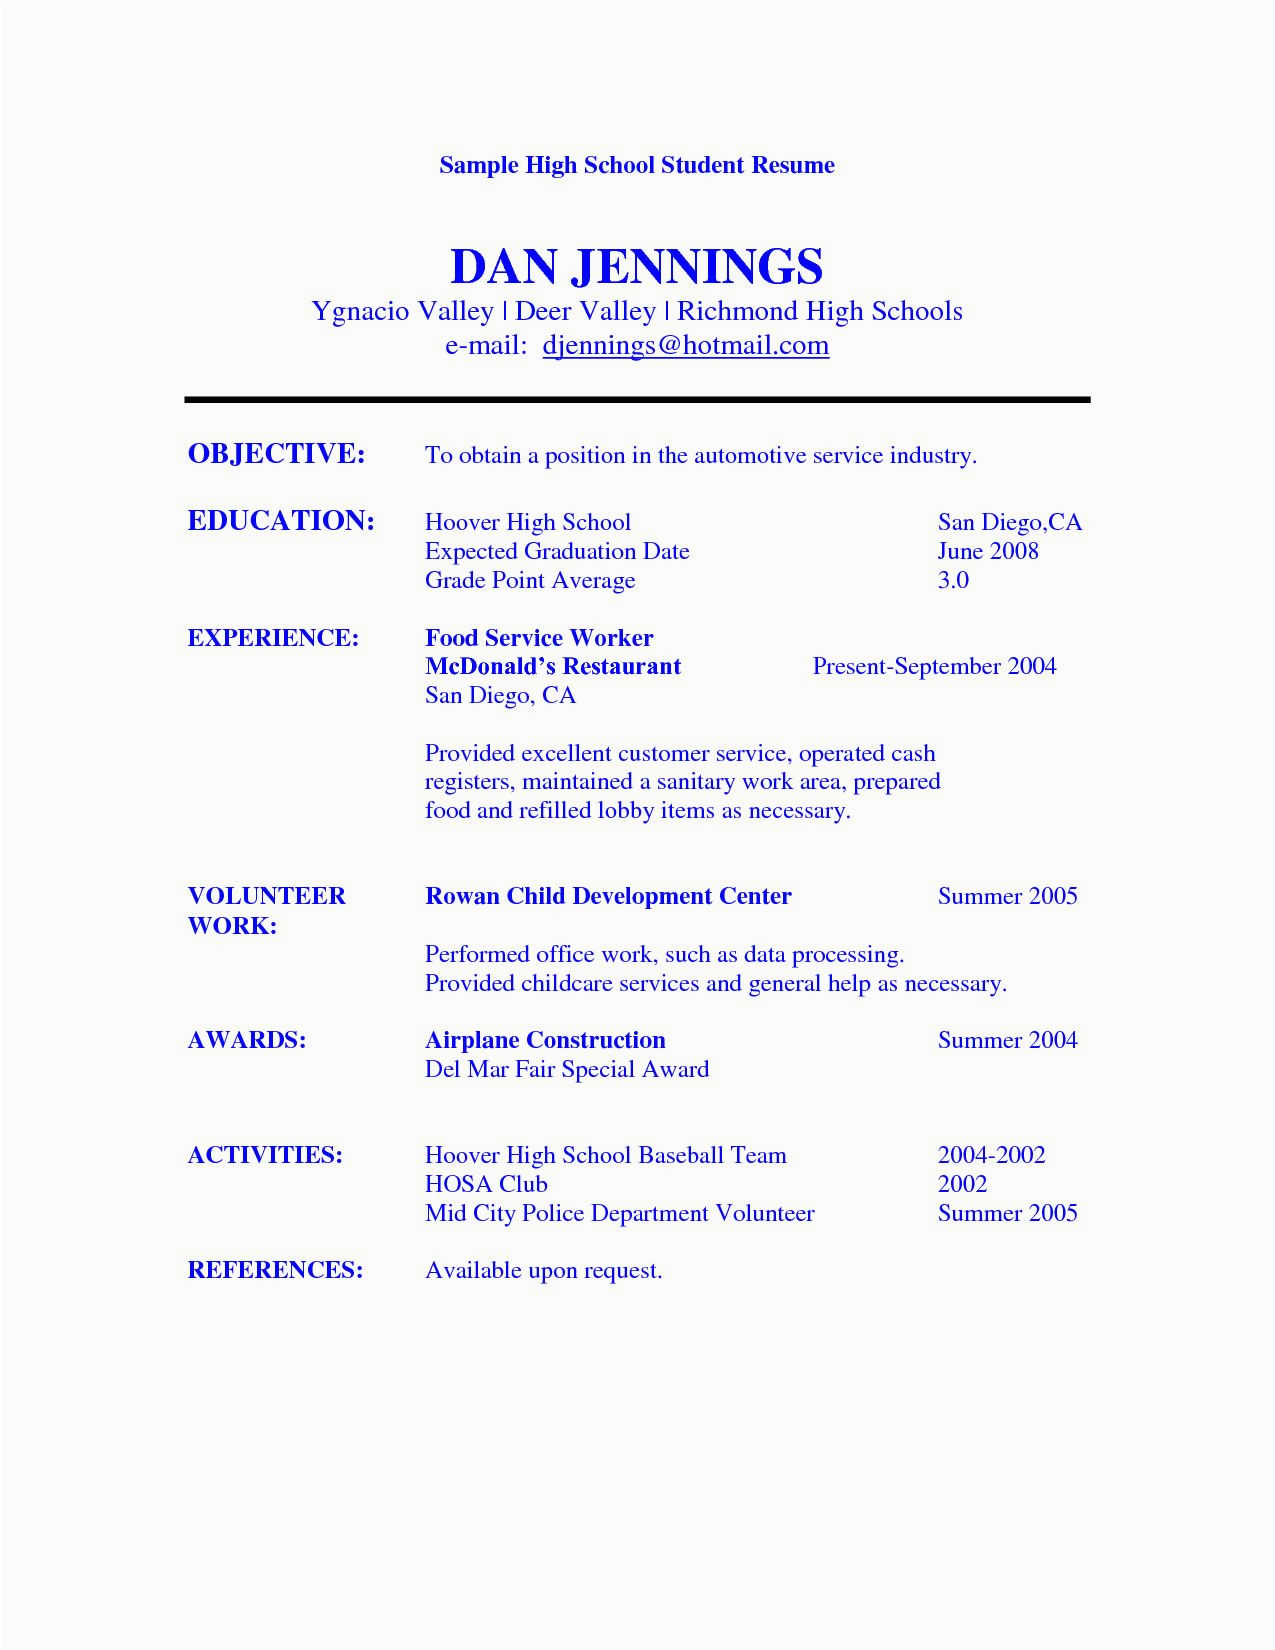 High School Student Resume Samples with Objectives Business Skills Resume